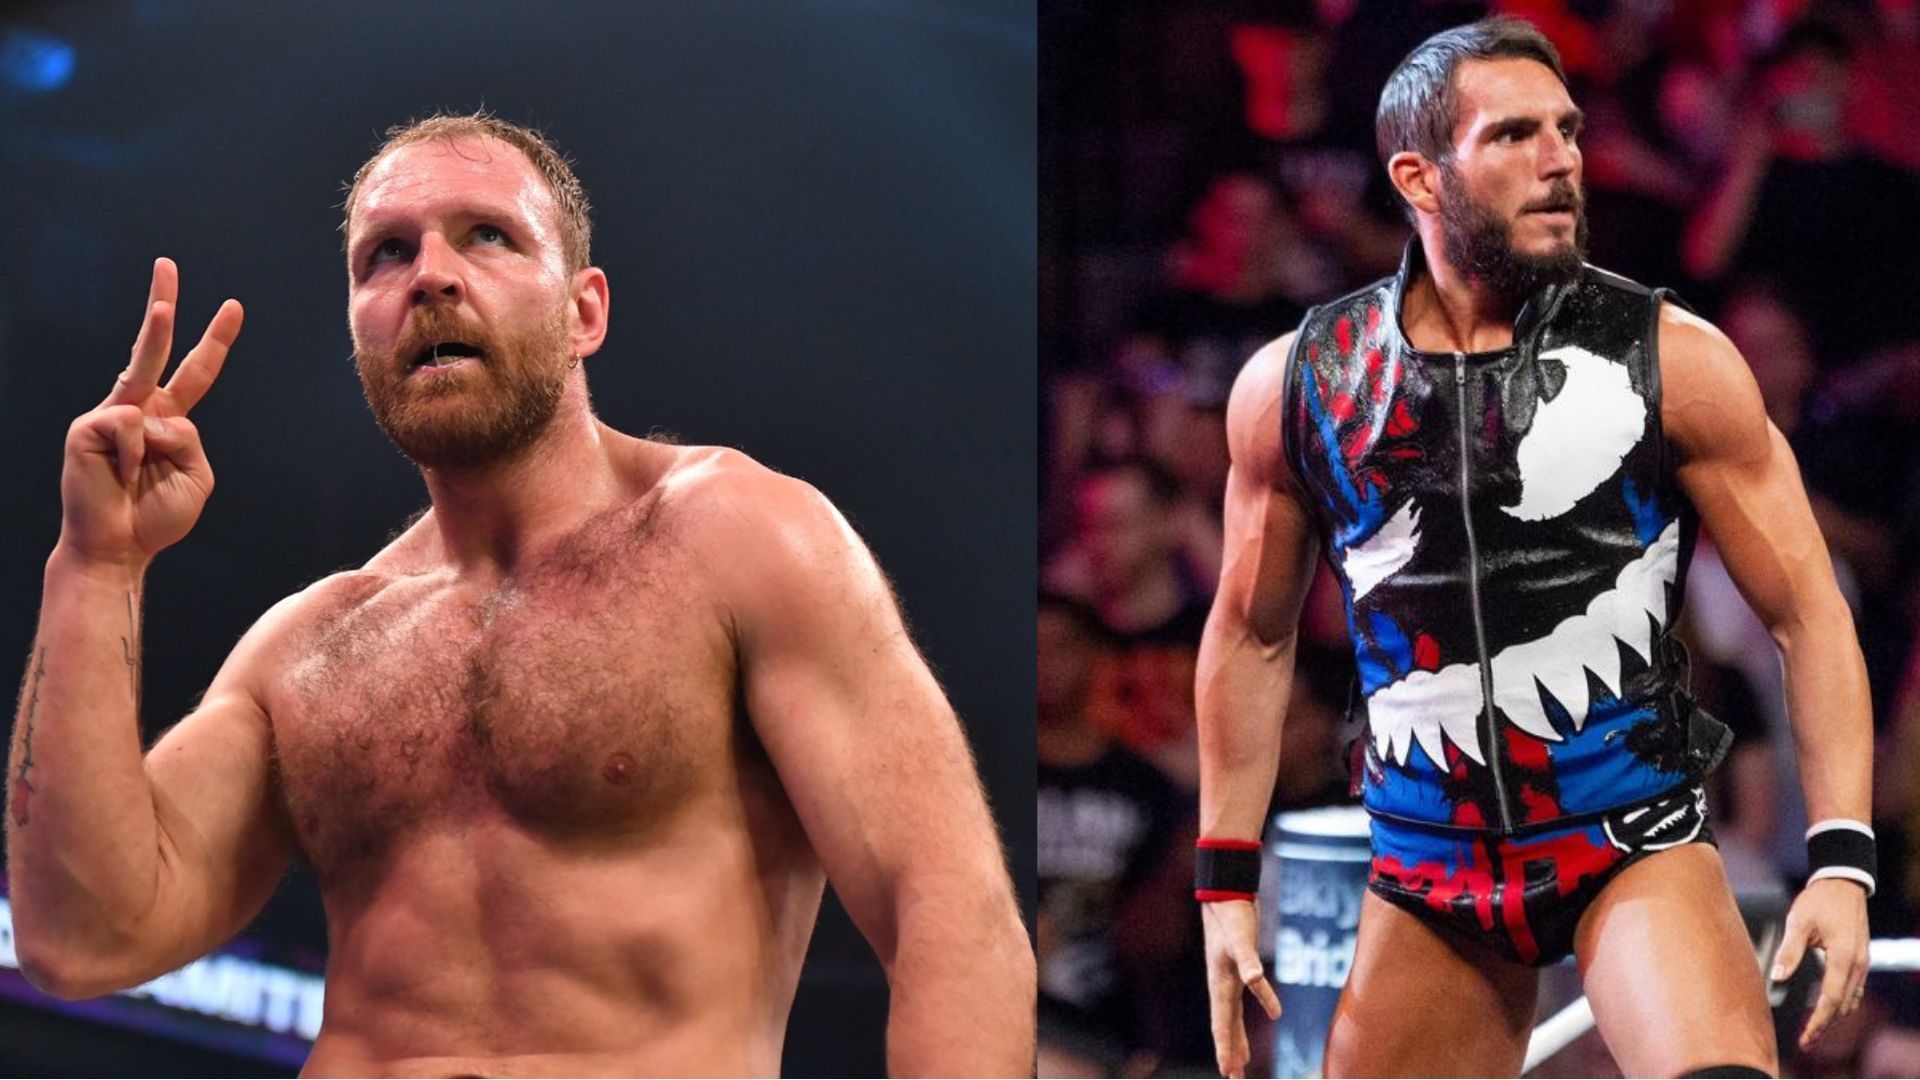 Jon Moxley and Johnny Gargano were both considered top free agents after letting WWE contracts expire